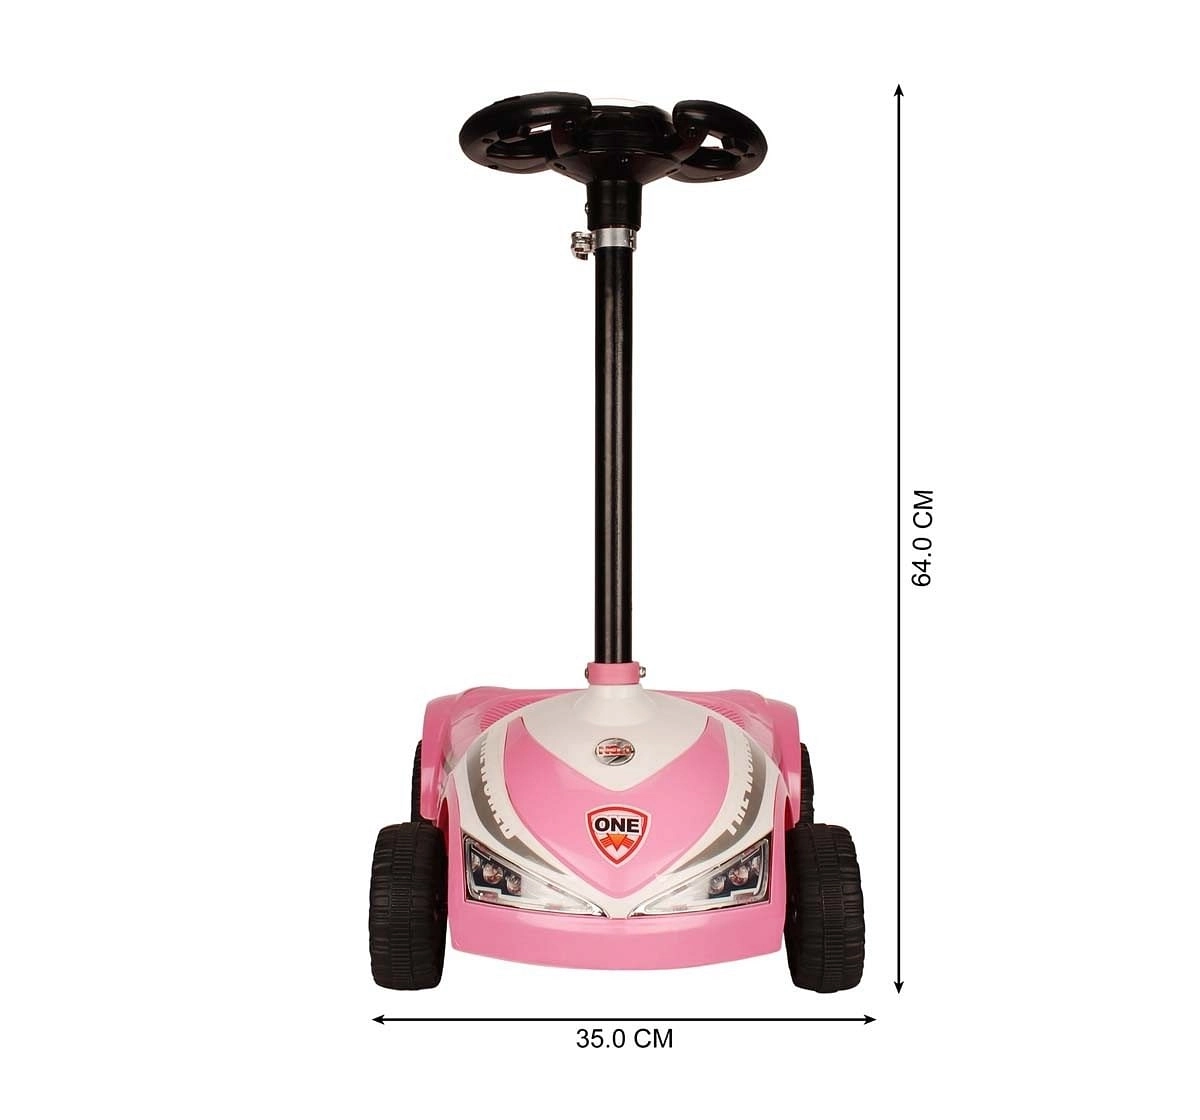 Megawheel Kids Scooty Pink Novelty Rideons for Kids age 3Y+ 